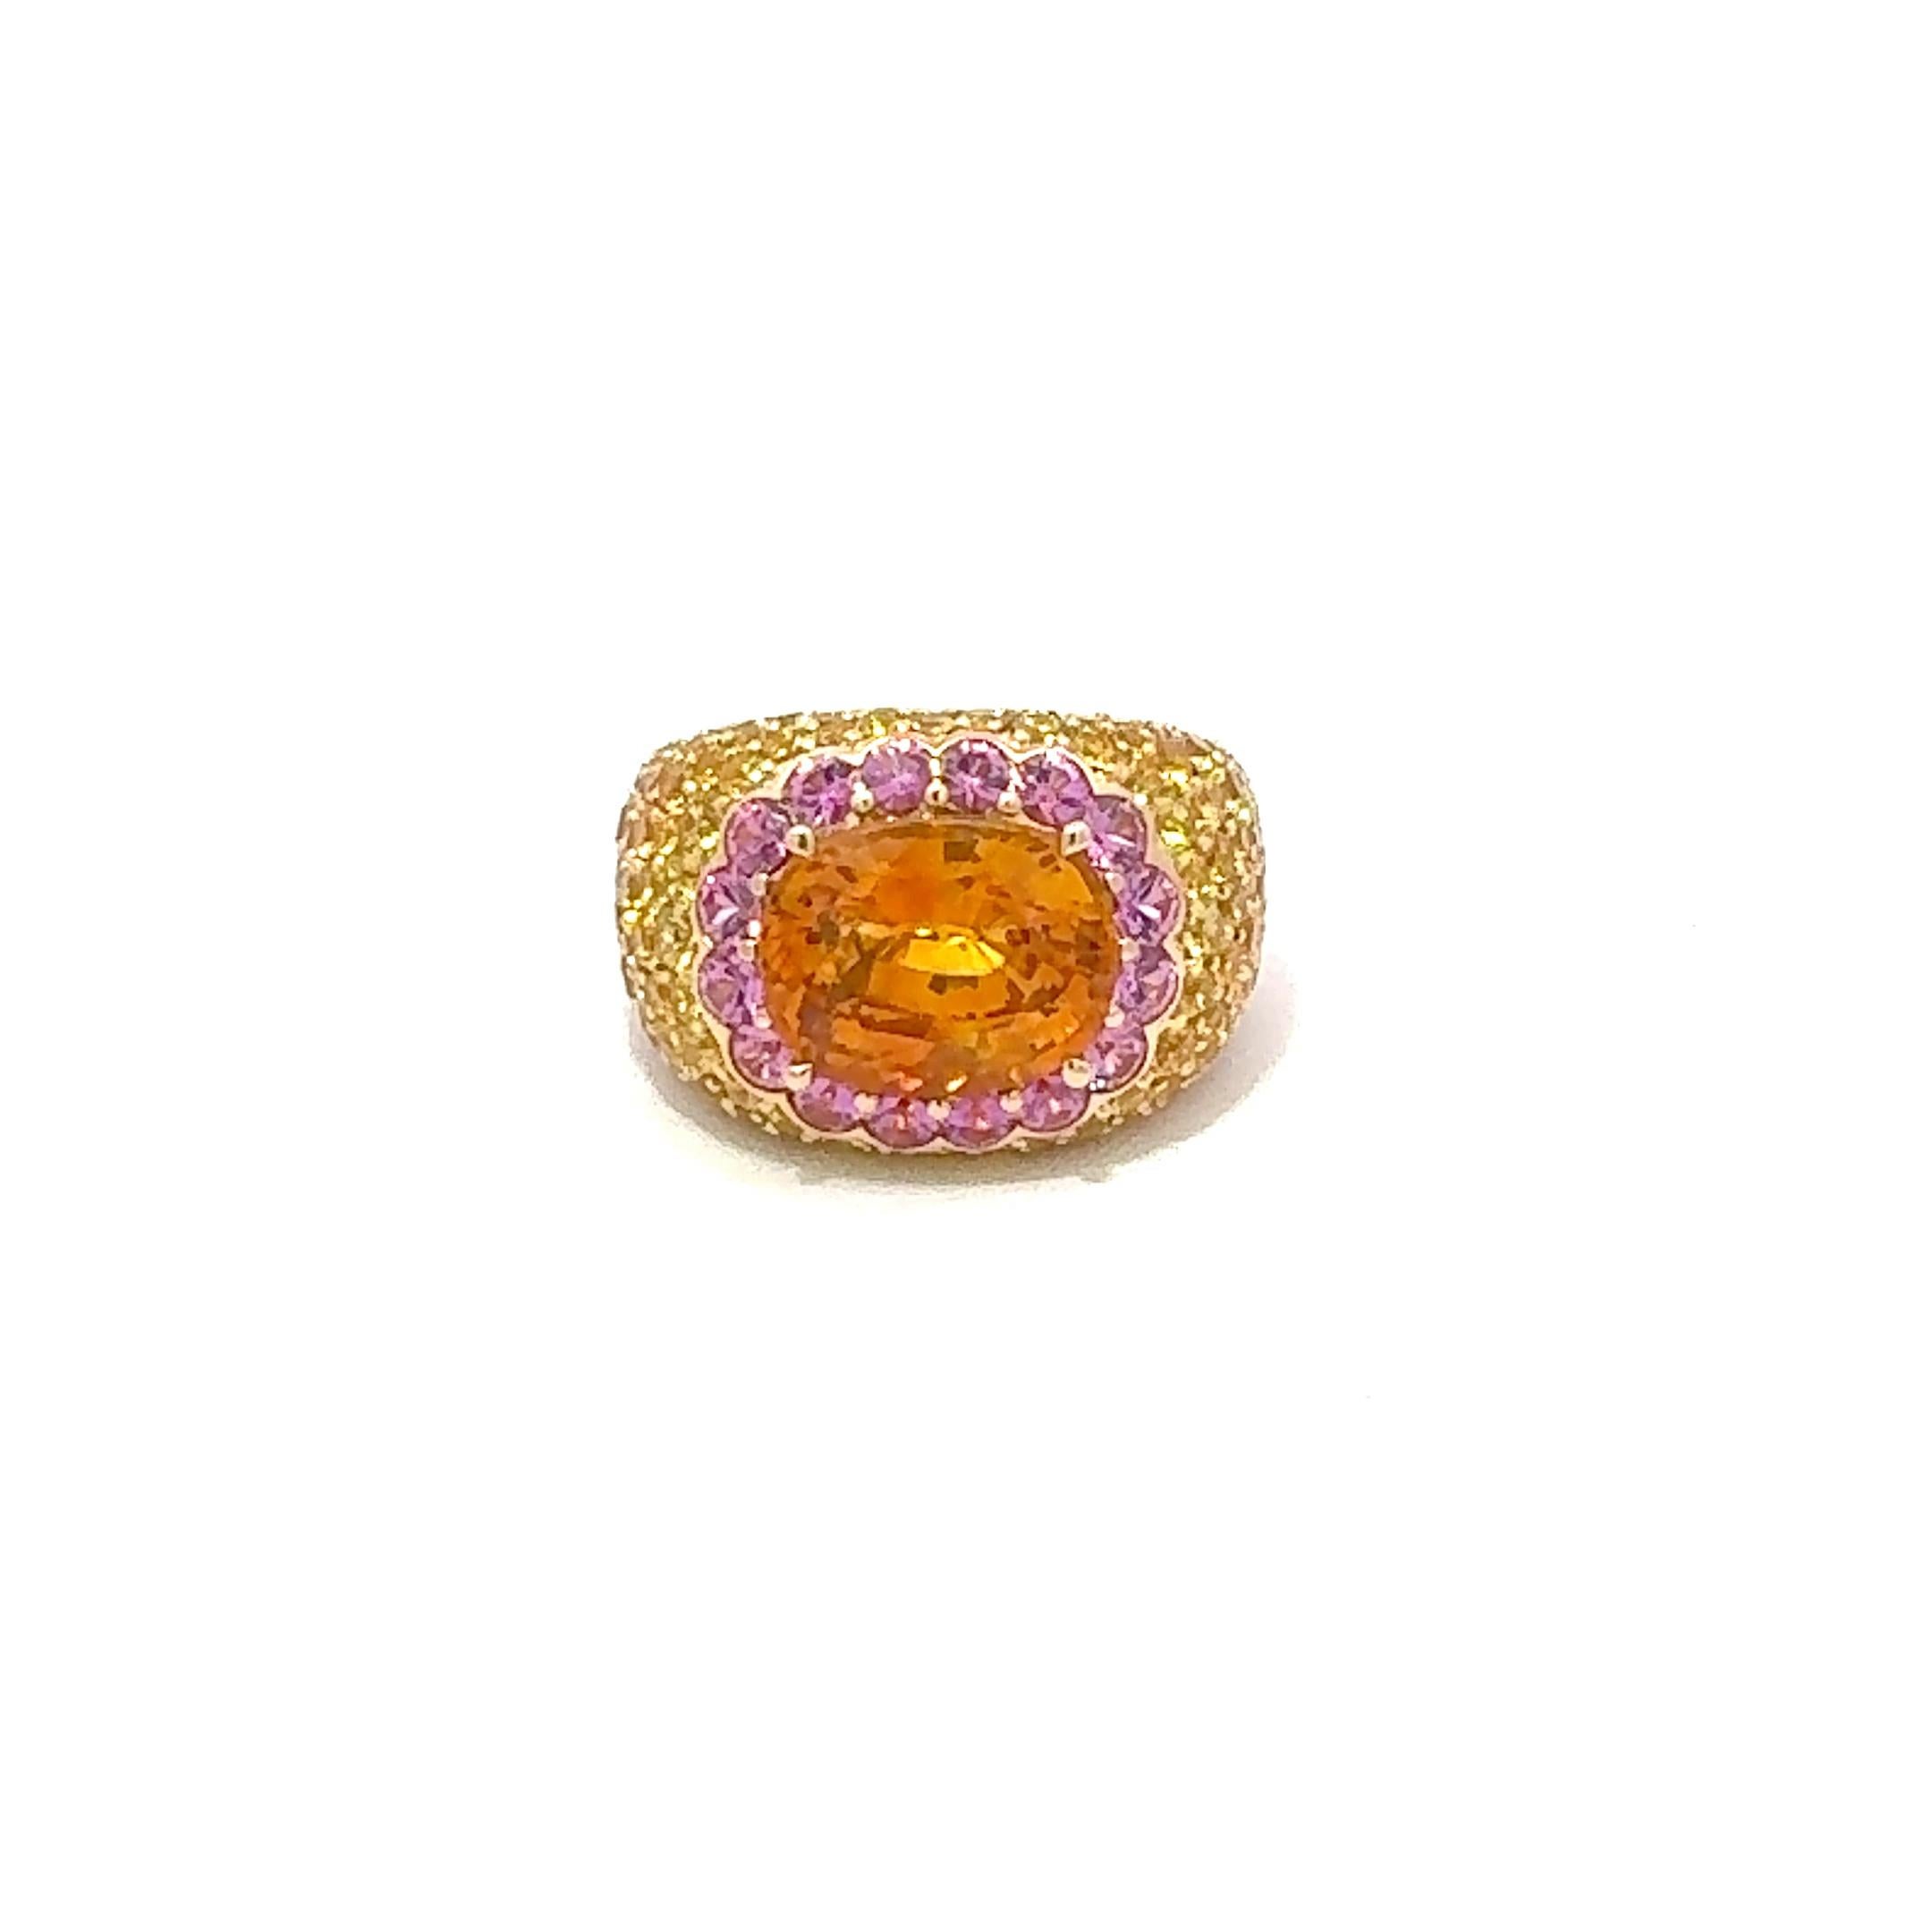 Ring

Yellow 18K Gold

Yellow Sapphire 13.55 ct
Pink Sapphire 1.63 ct
Orange Sapphire 1.65 ct

Weight 17,5 grams

It is our honour to create fine jewelry, and it’s for that reason that we choose to only work with high-quality, enduring materials